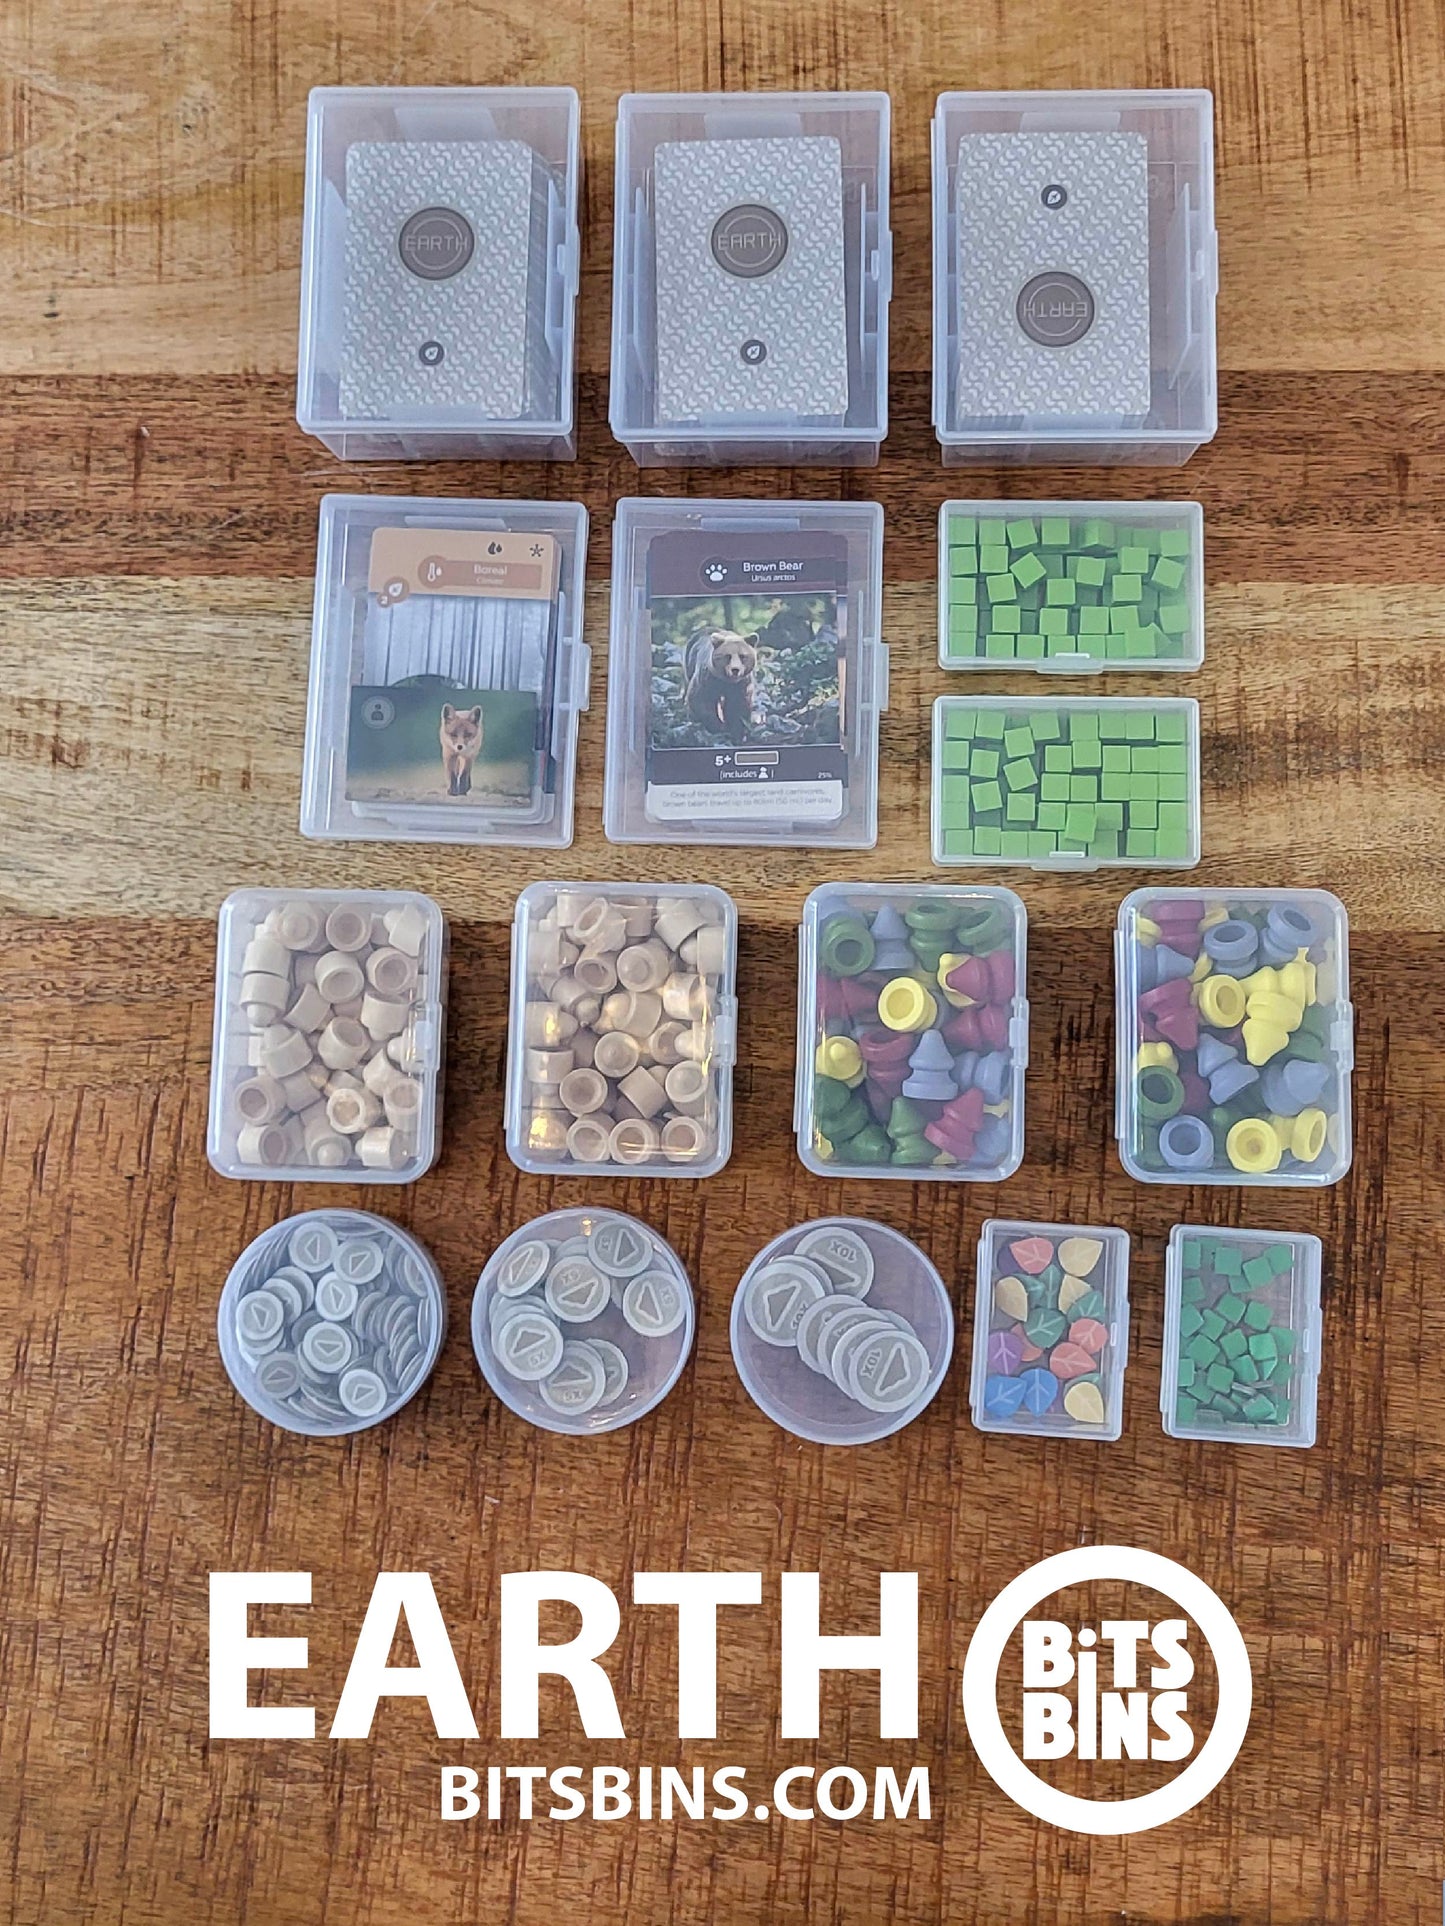 RECOMMENDED Earth - 3 Pods, 2 Originals, 2 XLs, 2 Card Boxes, 3 100+ Card Box, 4 Cases